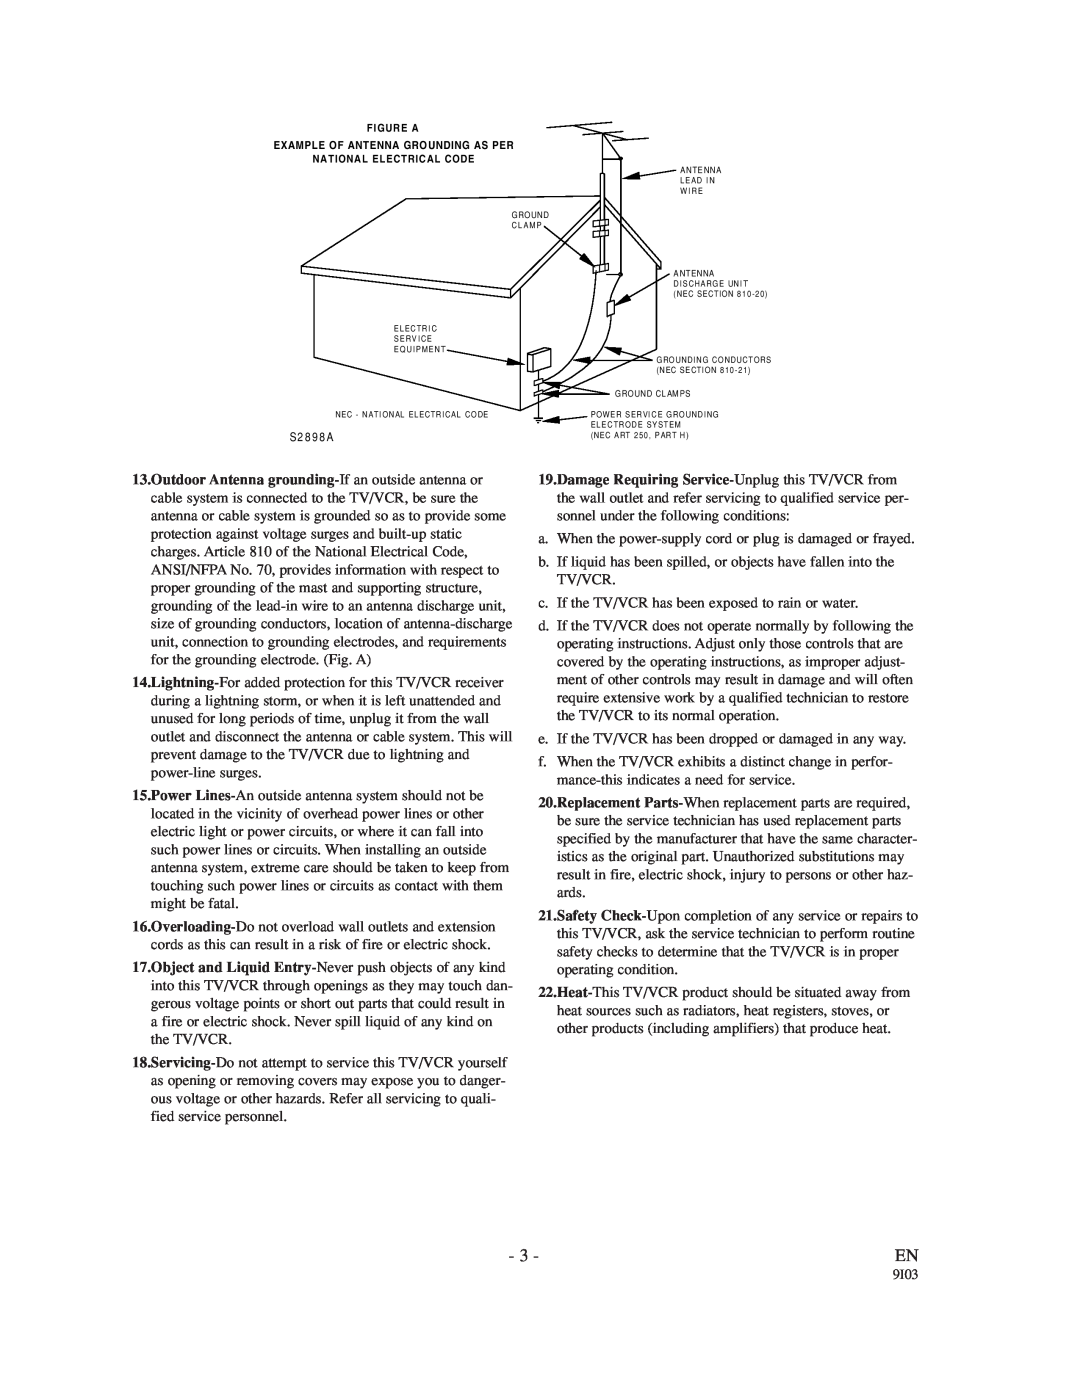 Emerson EC1320C owner manual S2 8 9 8 A, Figure A Example Of Antenna Grounding As Per National Electrical Code 